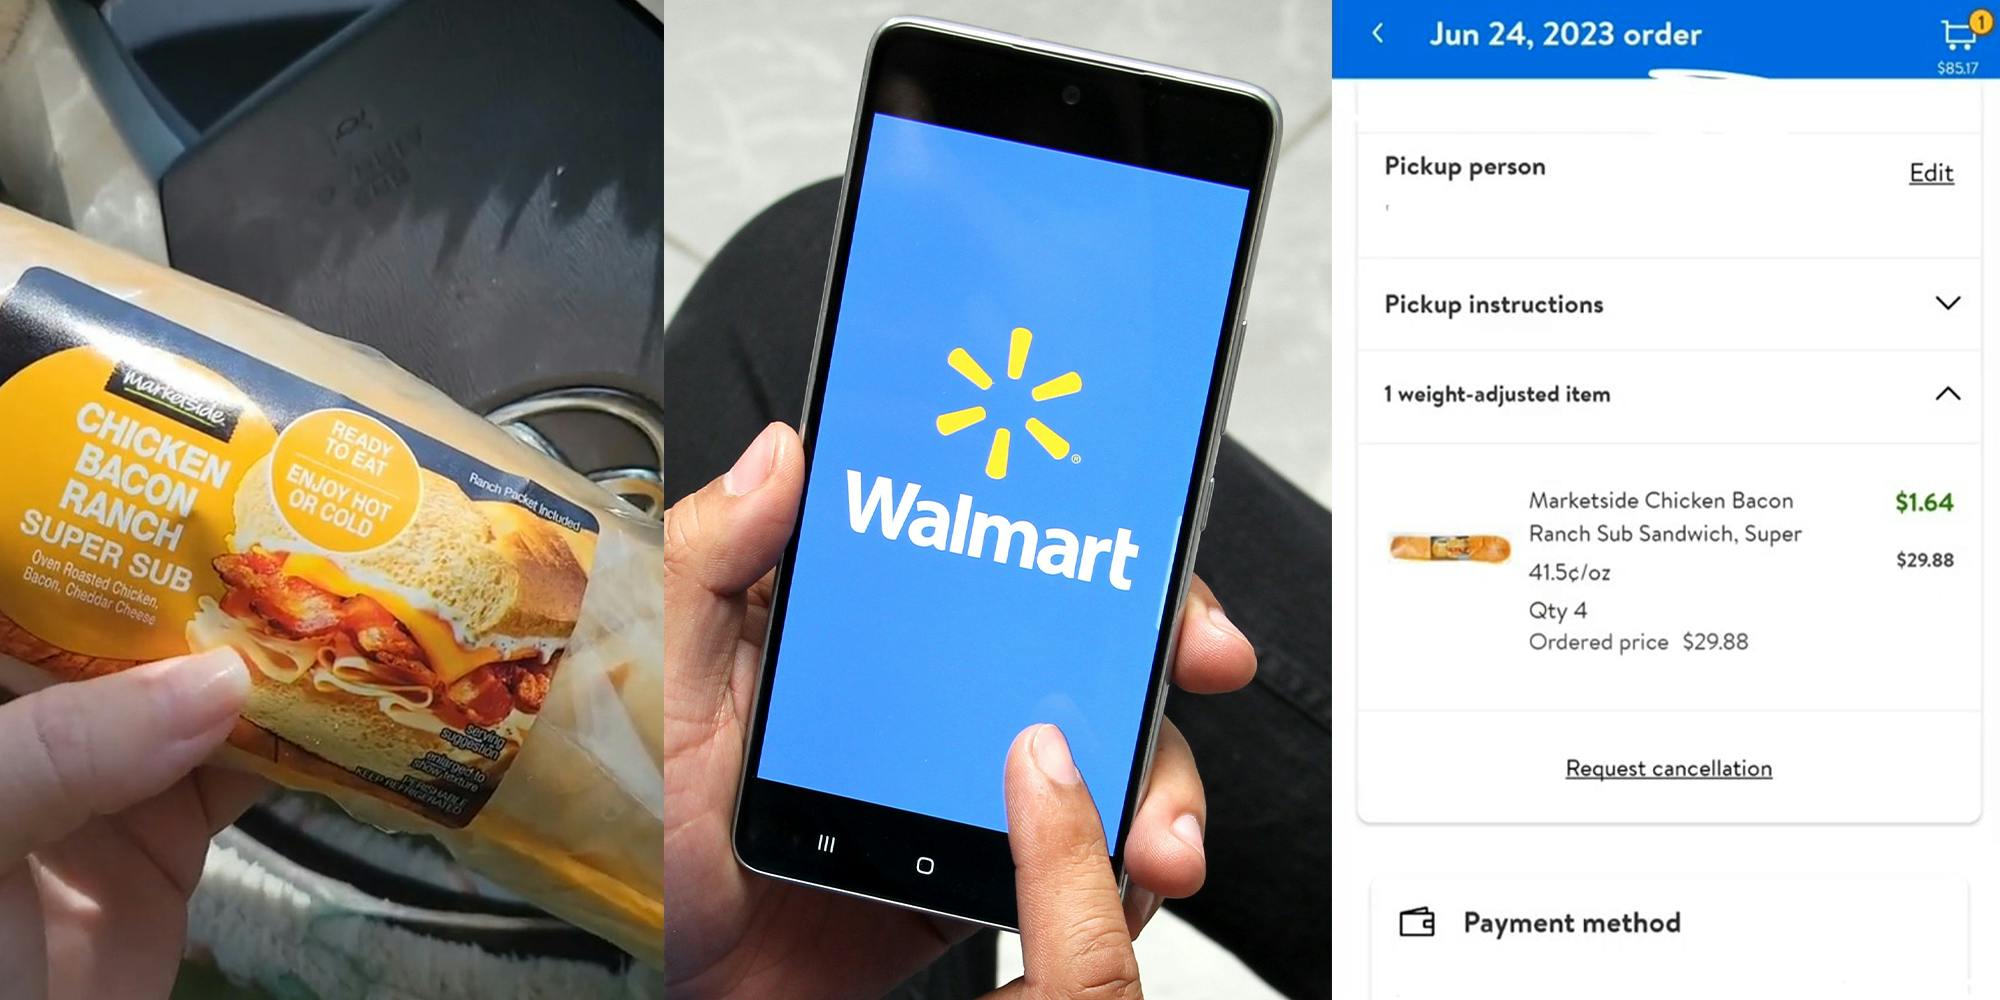 Walmart customer shares her hack to getting 5 ‘Marketside’ sub sandwiches for $1.64